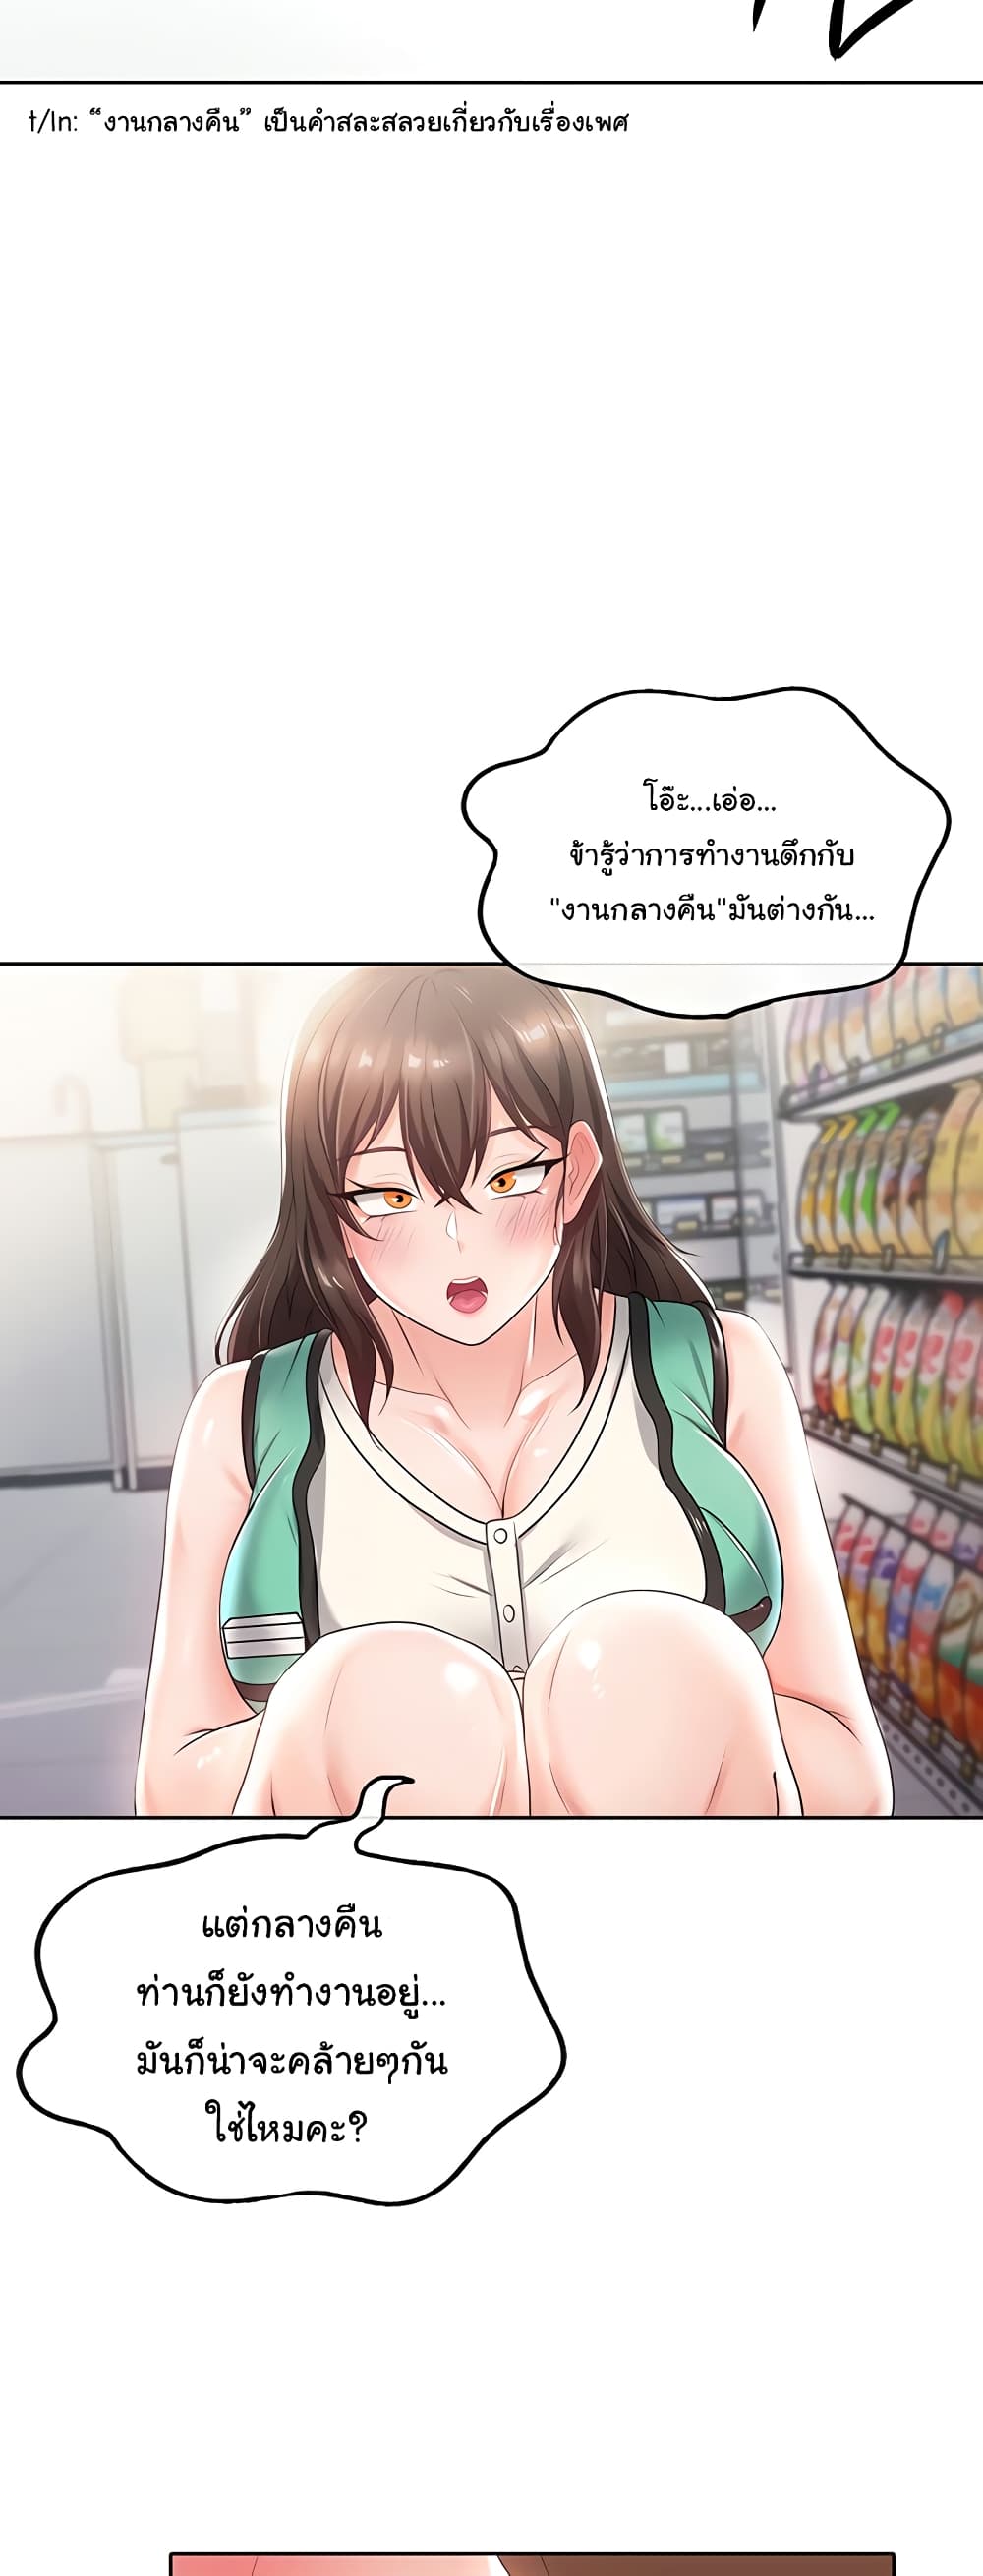 Welcome to the Isekai Convenience Store 8-8